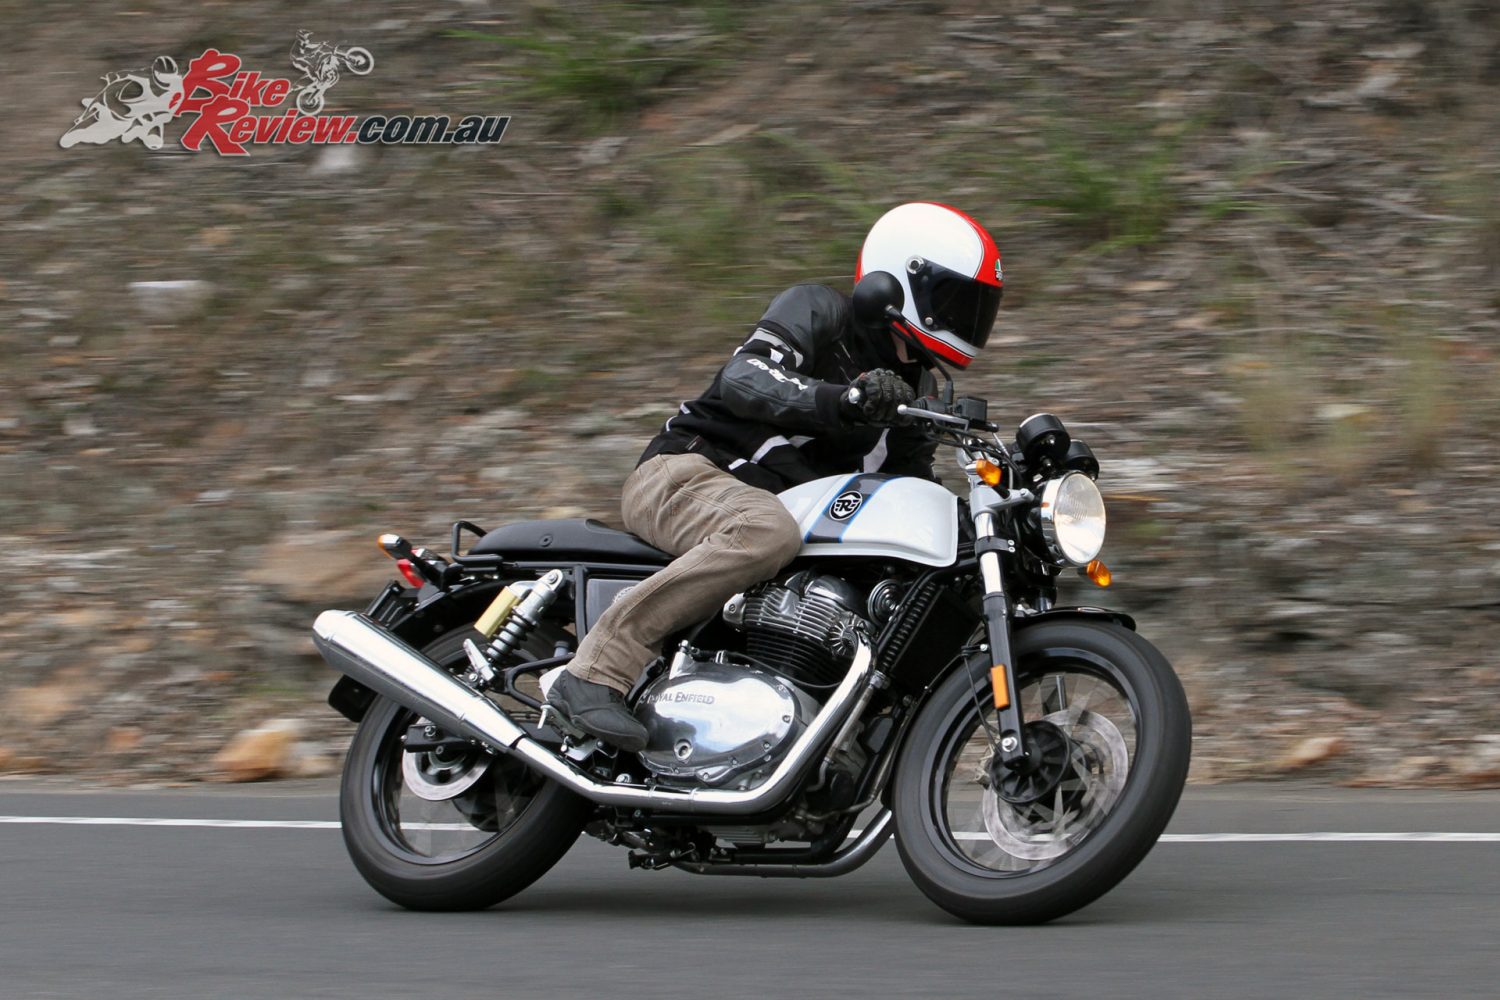 2019 Royal Enfield Continental GT 650 Review